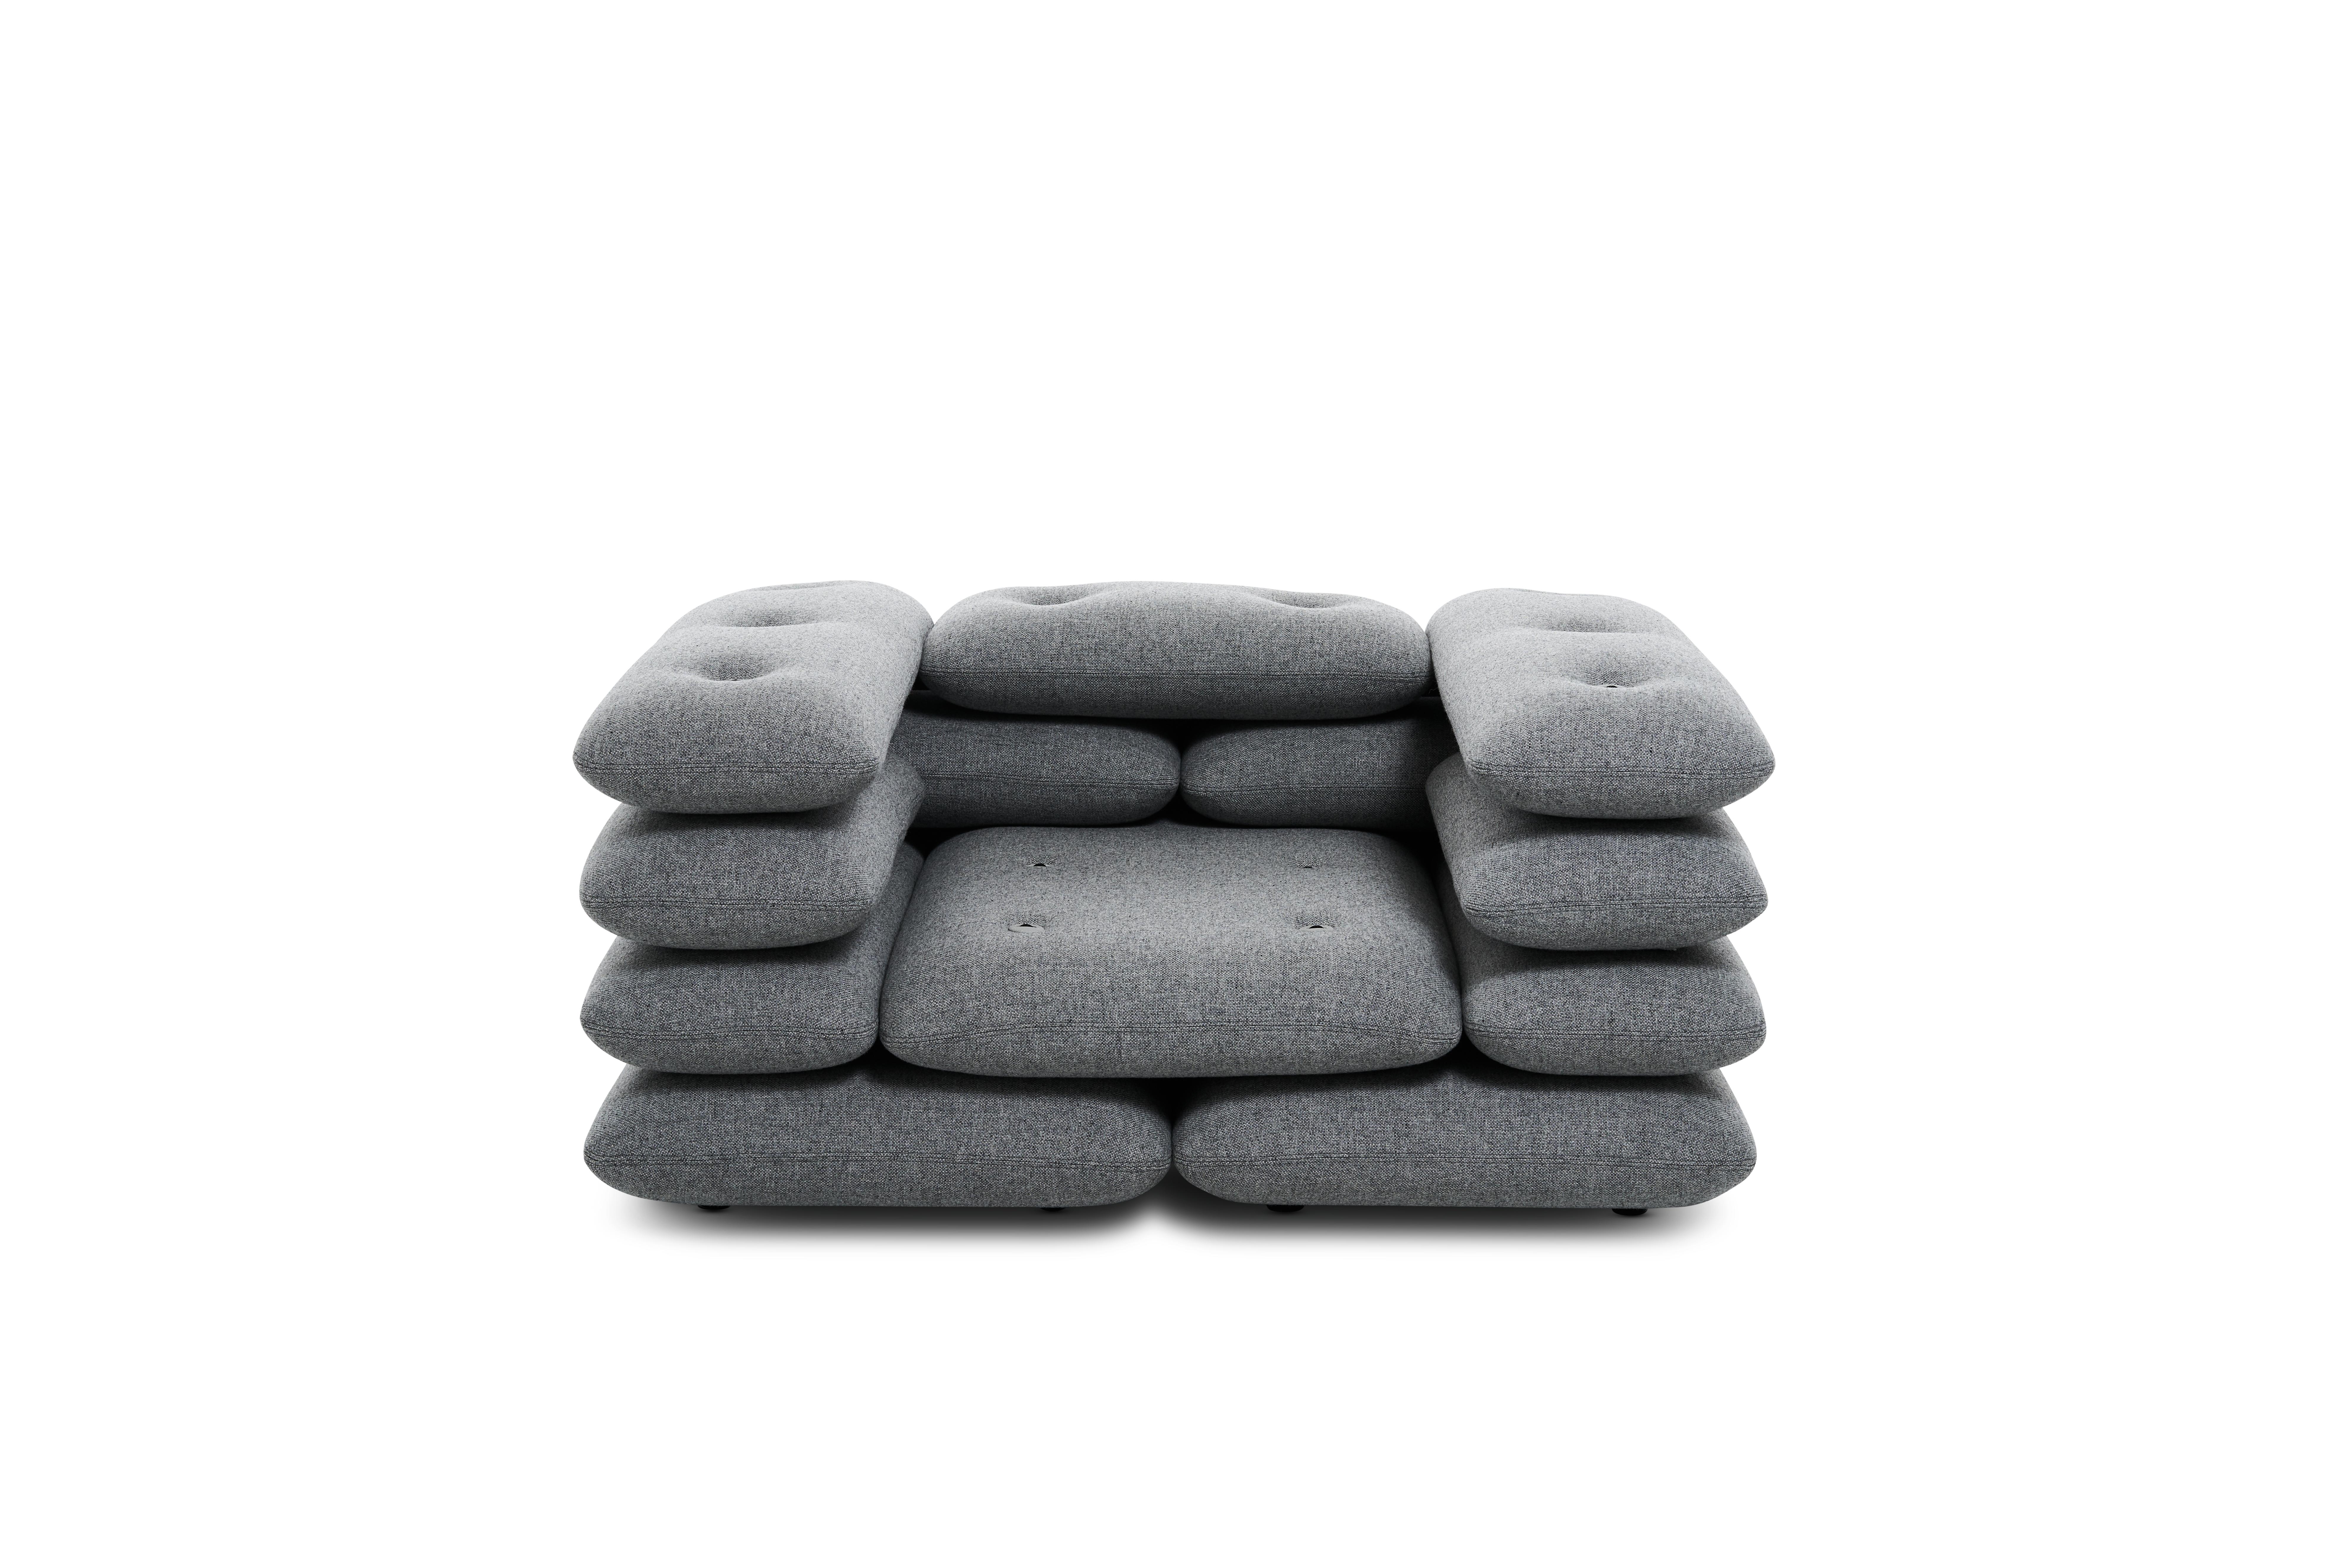 Sand bag like cushions made of upholstered foam. Bricklaying design fixed up with tailor quality buttons made of fiber concrete and tied up with rope. 

Upholstery :
Kvadrat Hallingdal 65 - 110
Kvadrat Hallingdal 65 - 130
Kvadrat Hallingdal 65